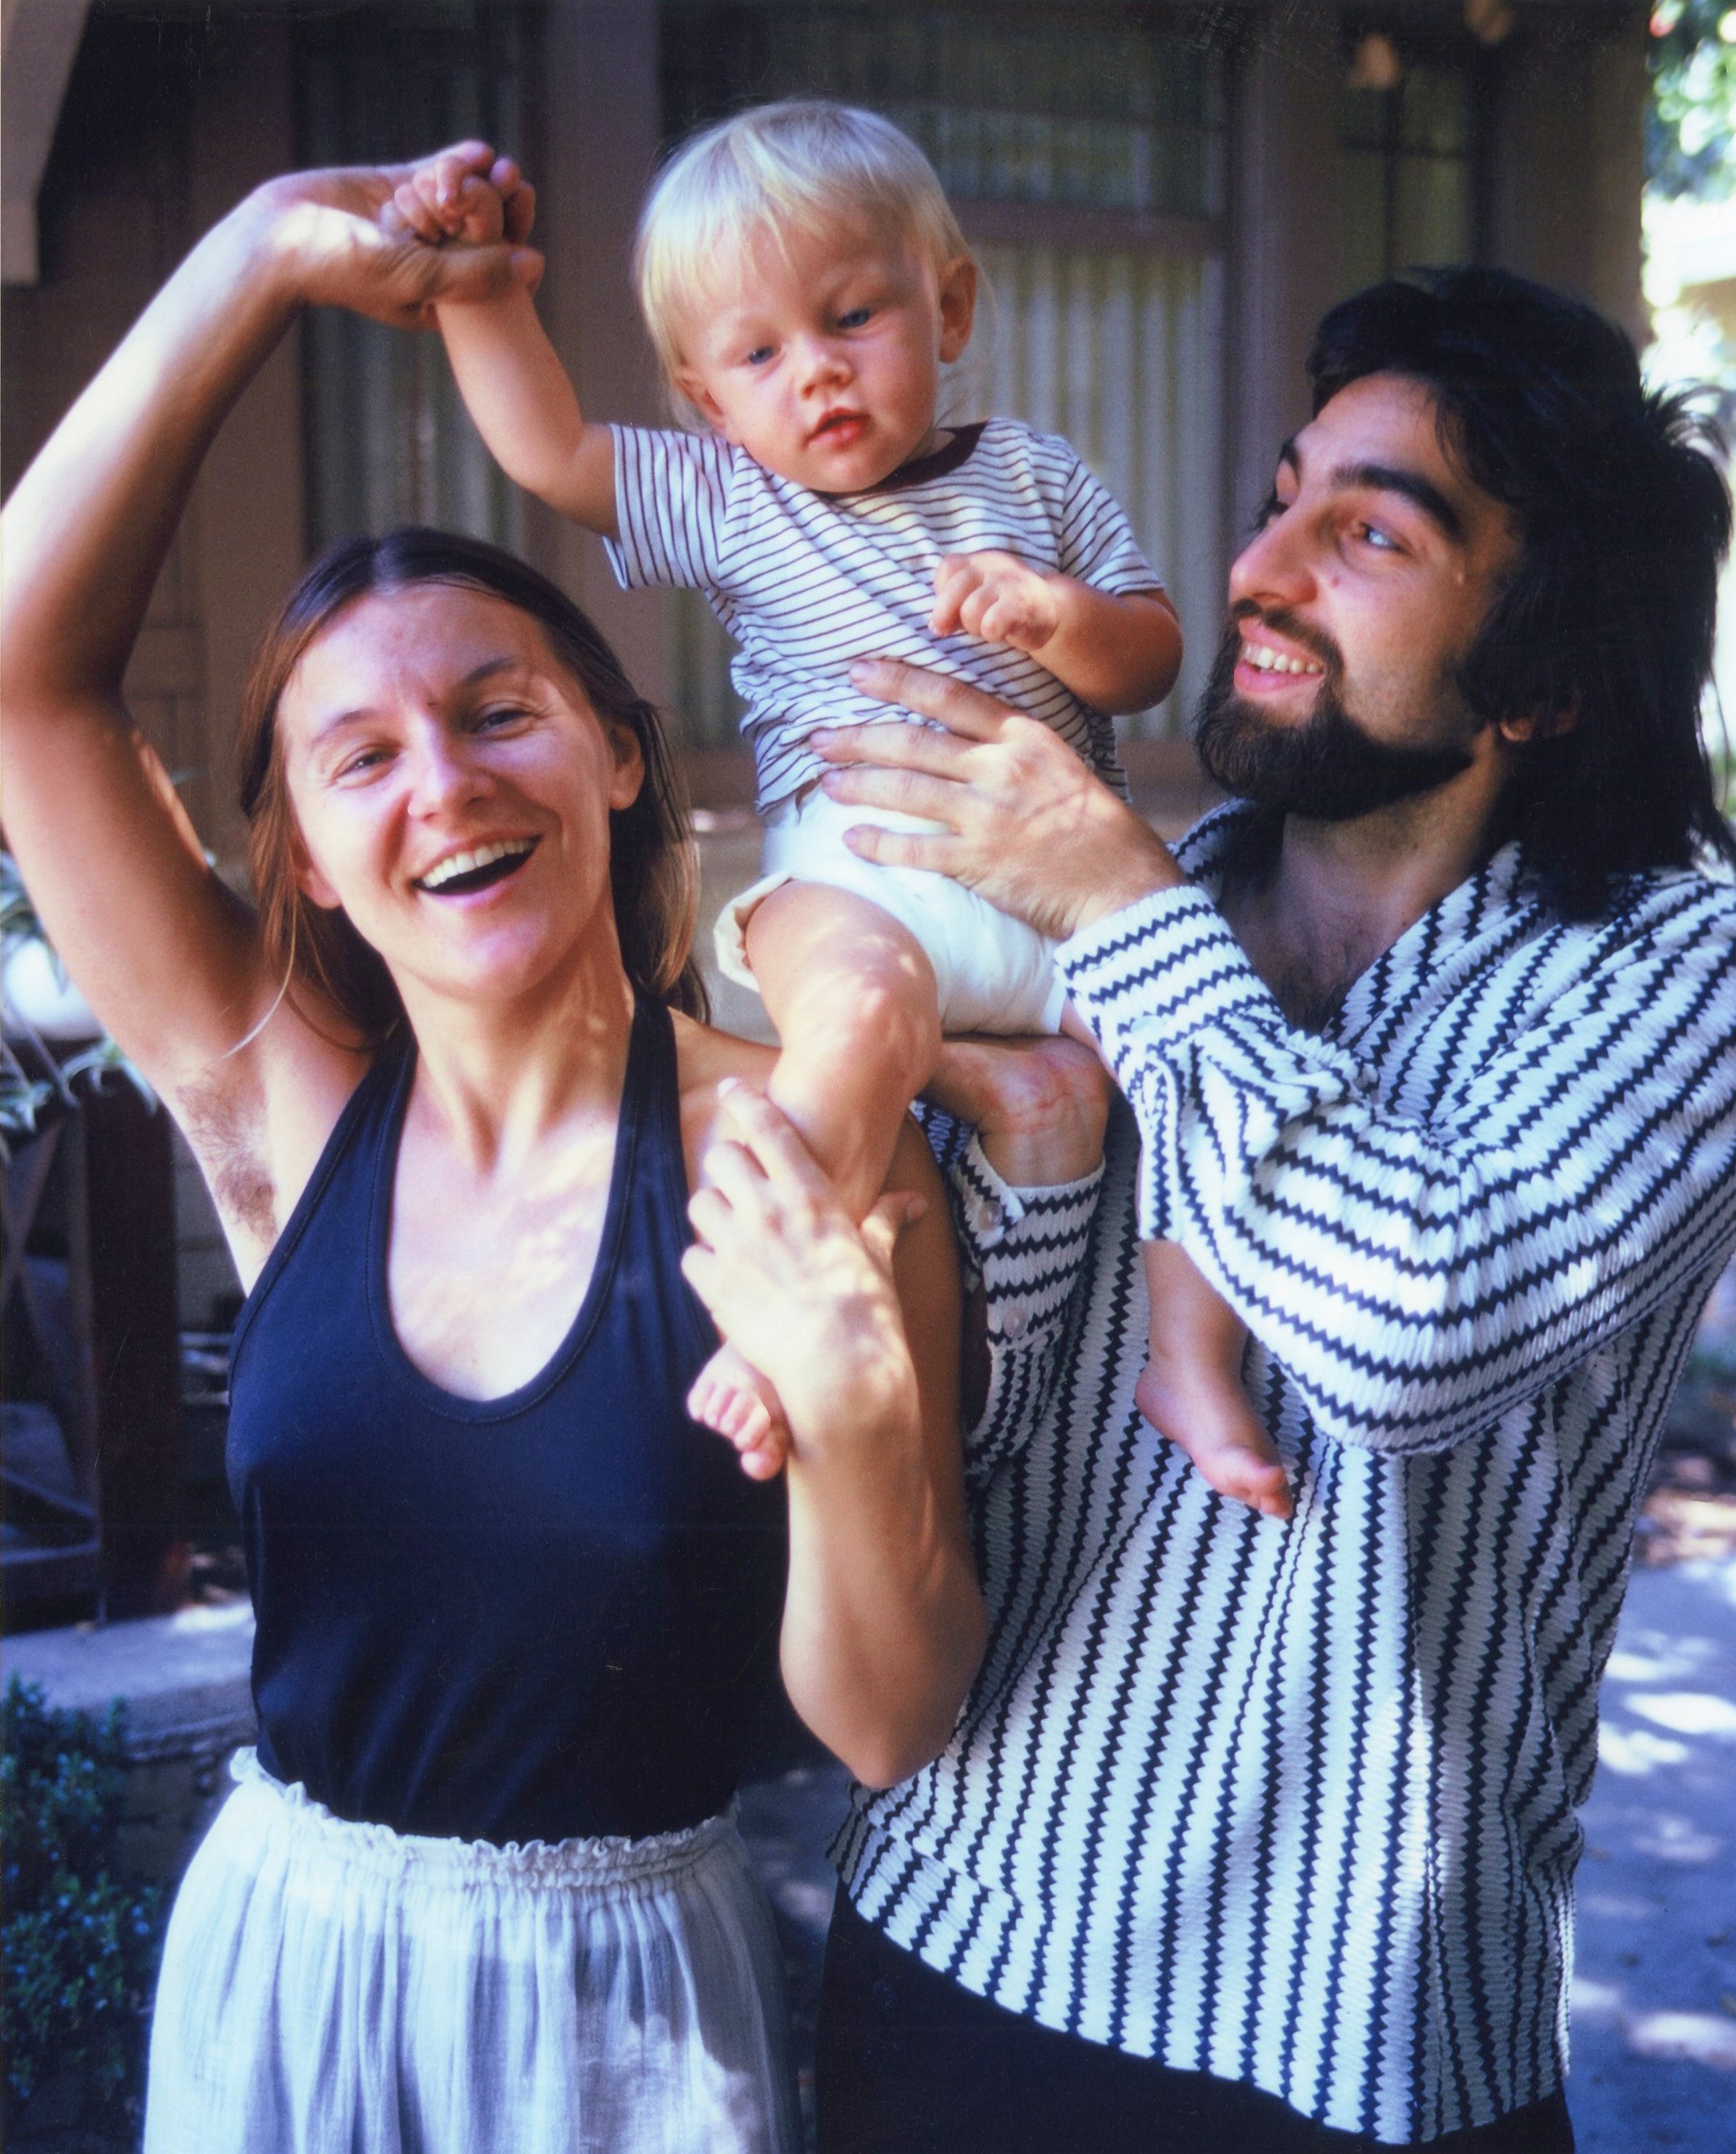 Leonardo DiCaprio, his father George DiCaprio and his mother Irmelin DiCaprio pose for a portrait outside their home in Hollywood, California, circa 1976 | Source: Getty Images